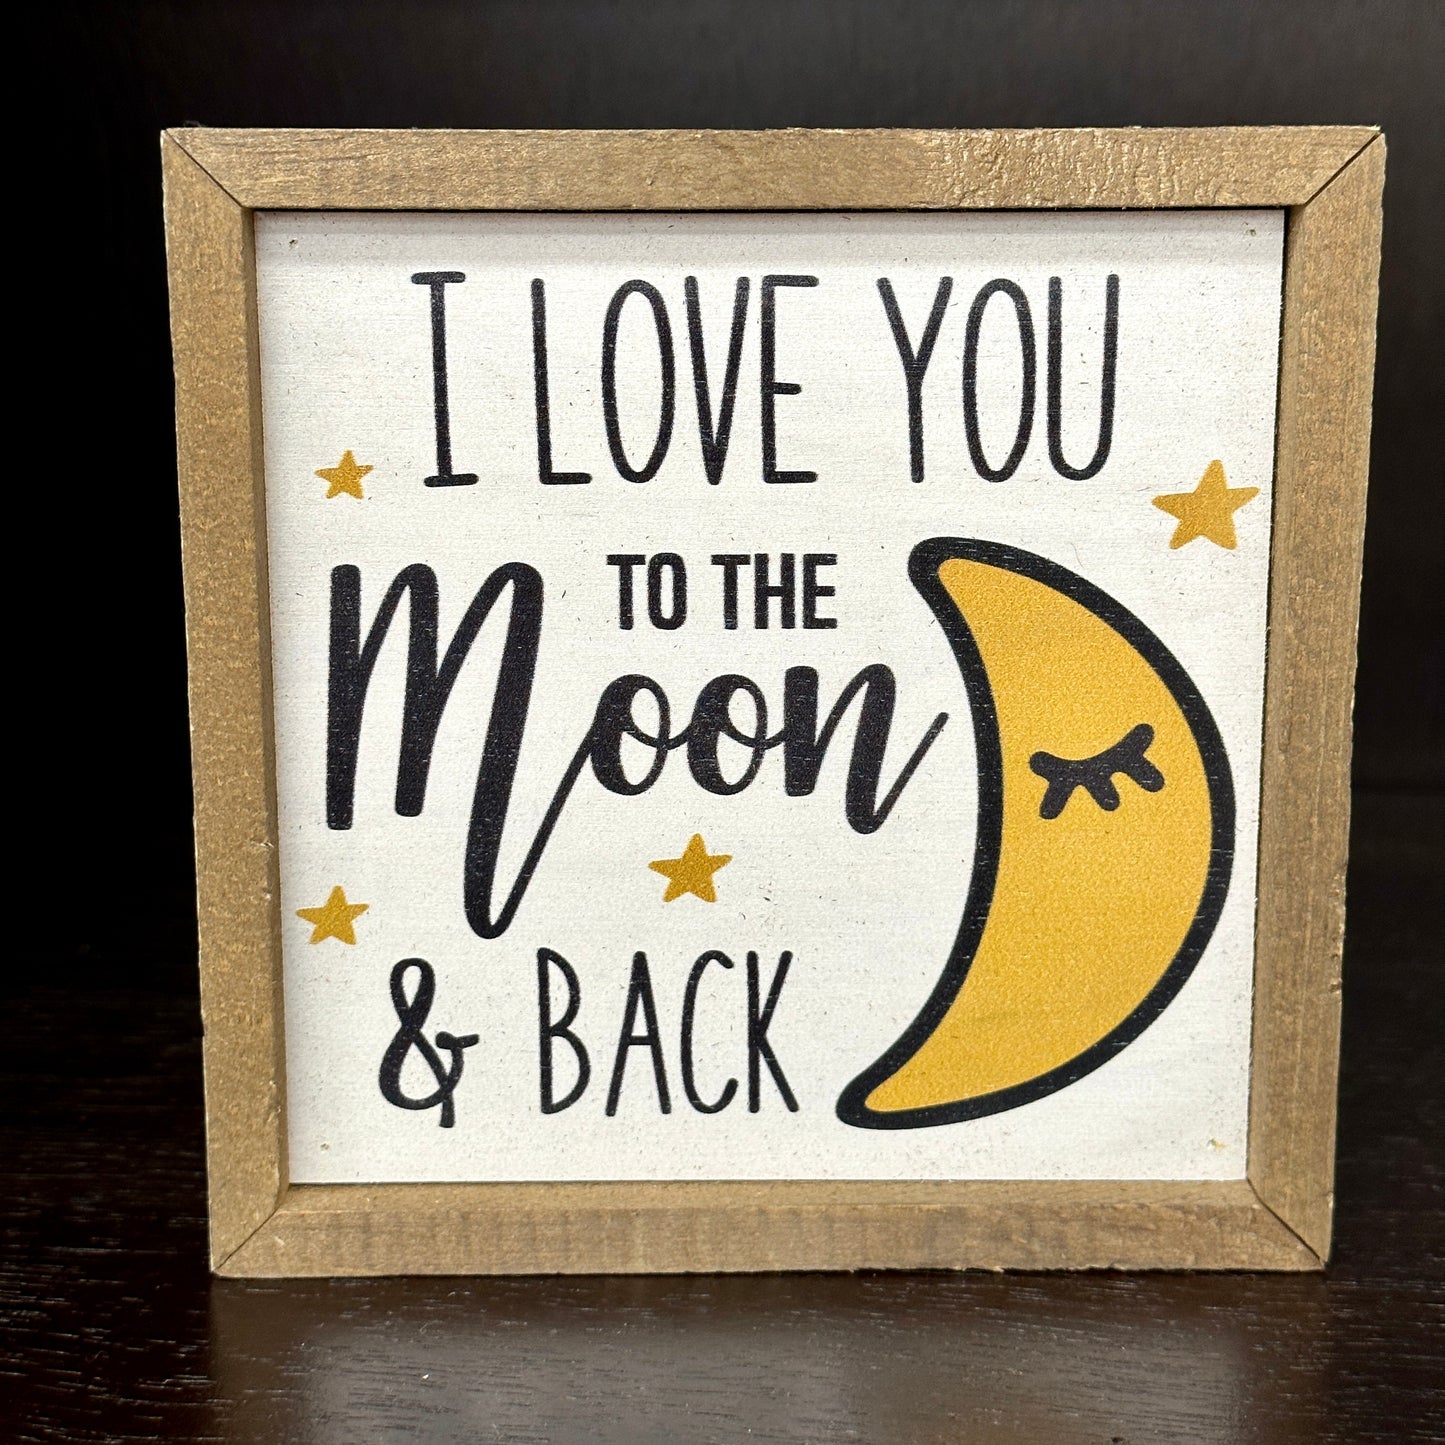 I LOVE YOU TO THE MOON & BACK BOX SIGN